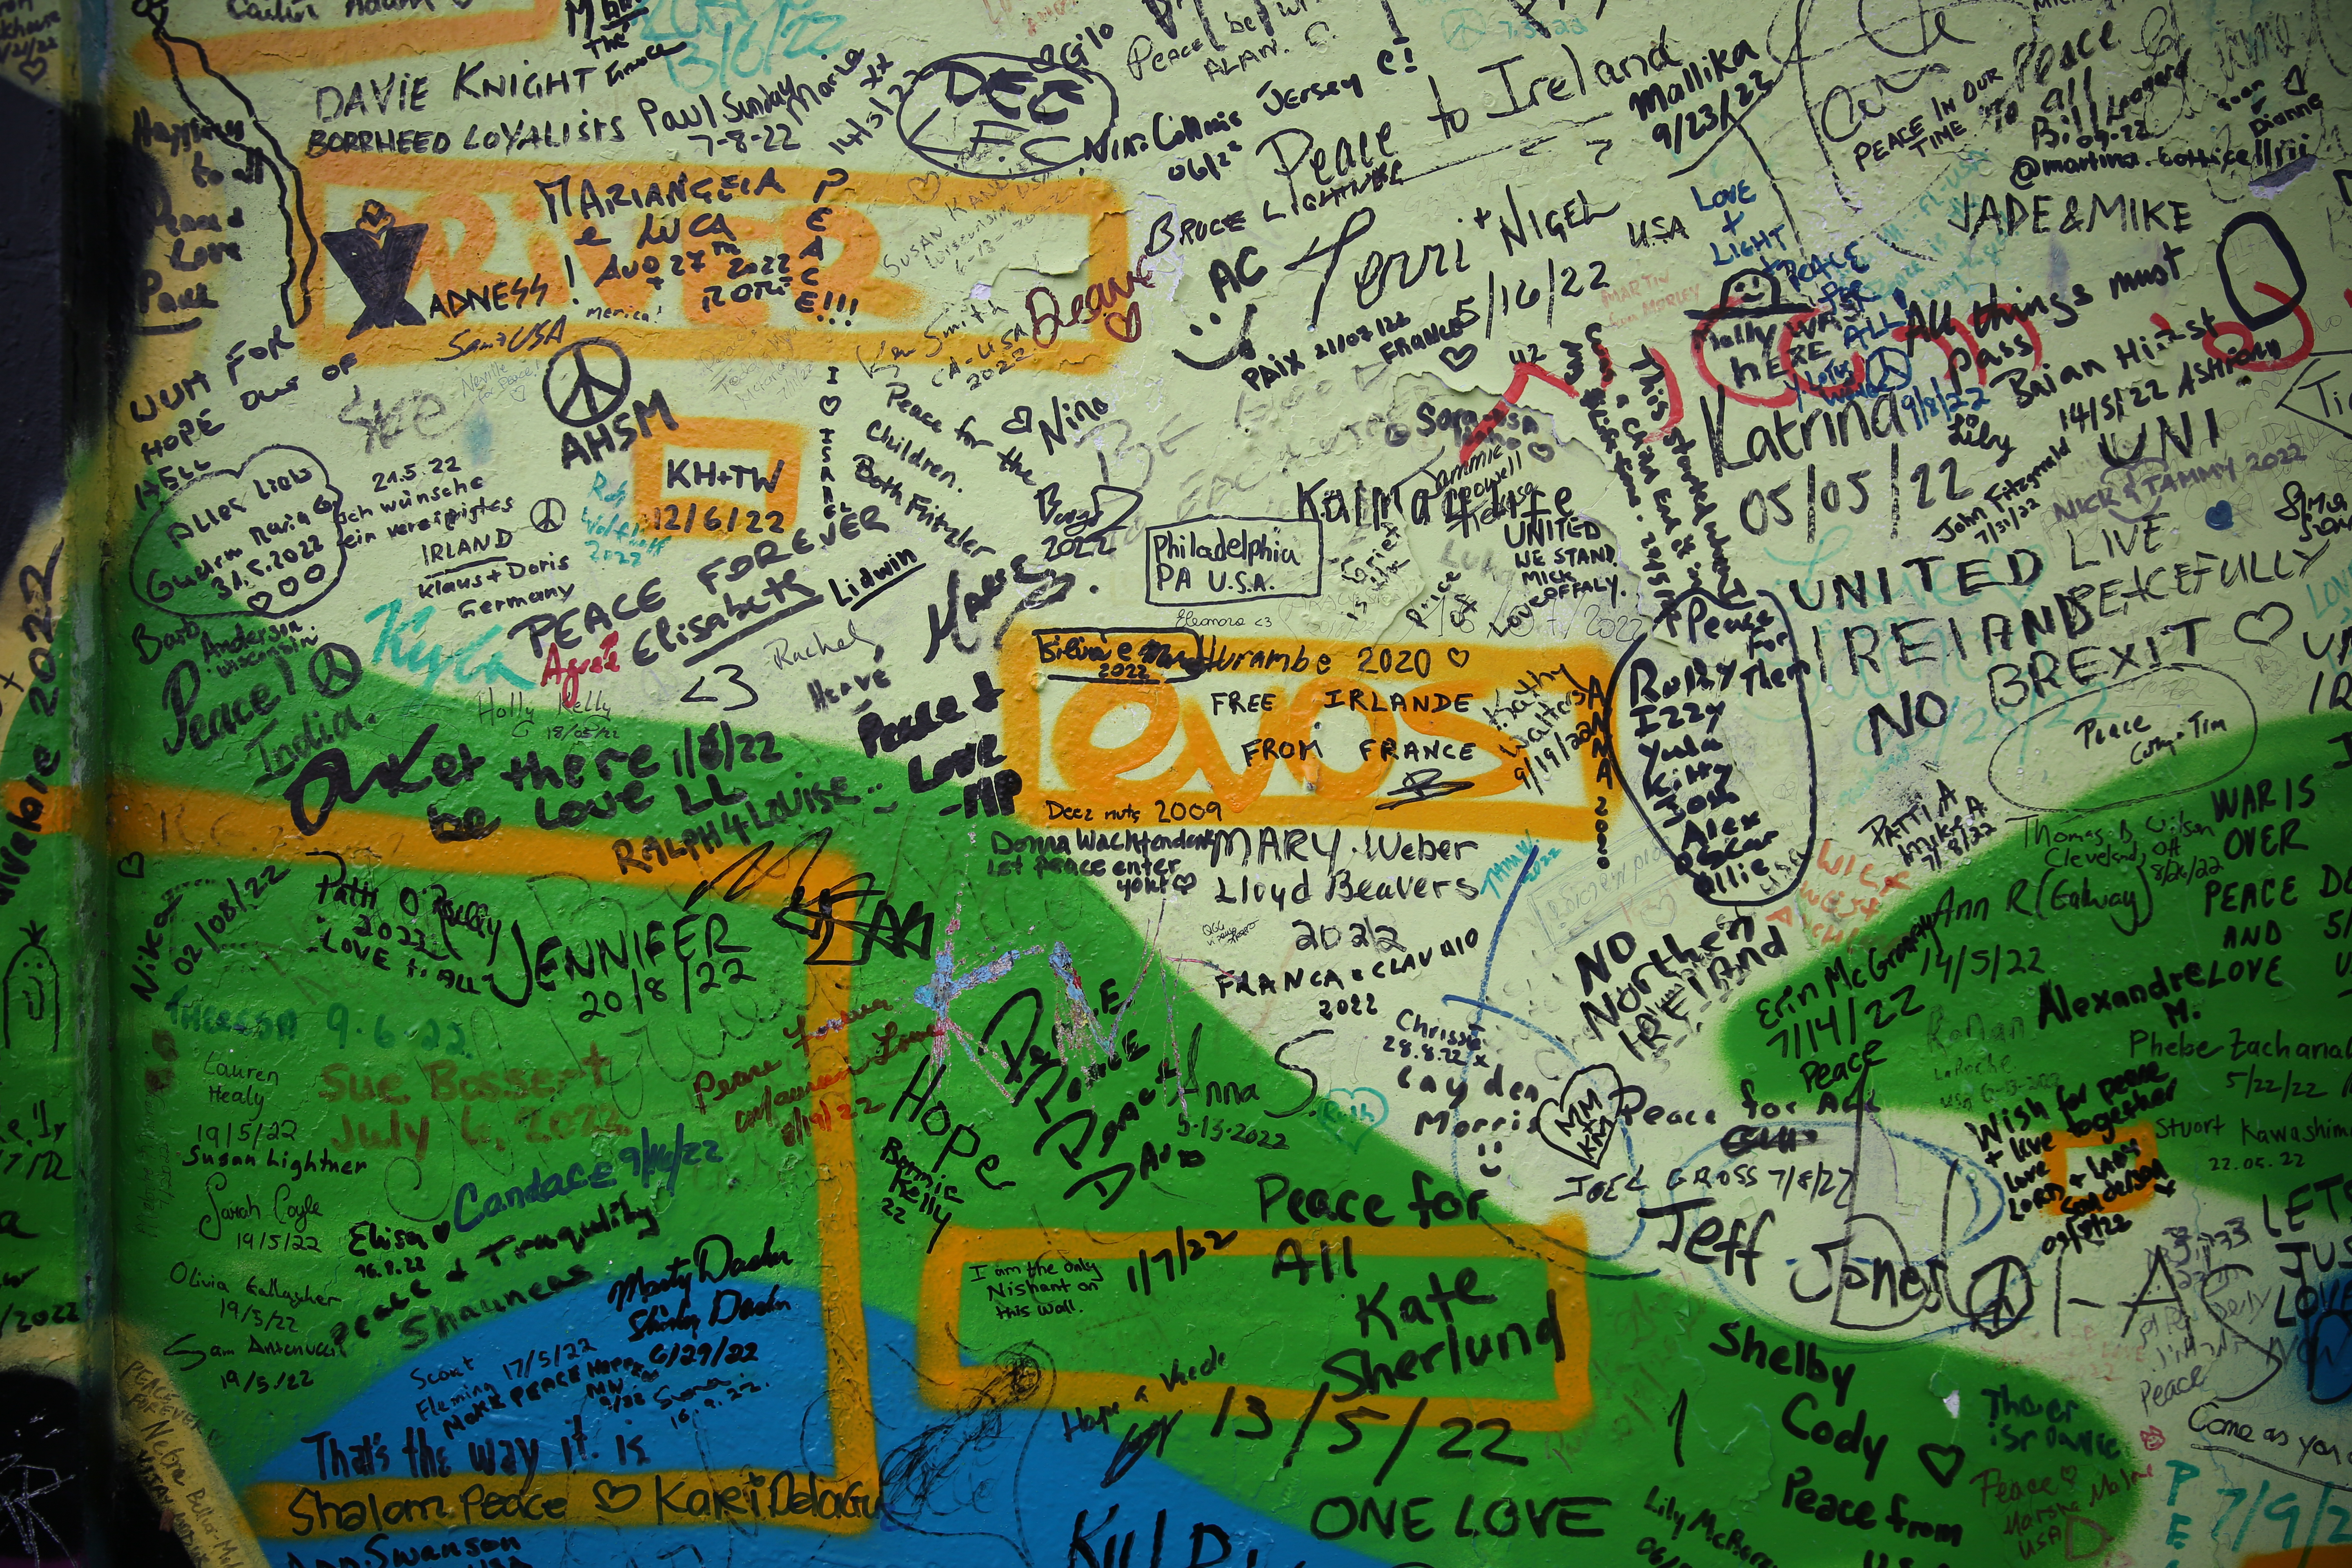 A small section of the Peace Wall on Cupar Way in Belfast, Northern Ireland. The miles-long wall is covered in messages of hope and peace from visitors around the world.